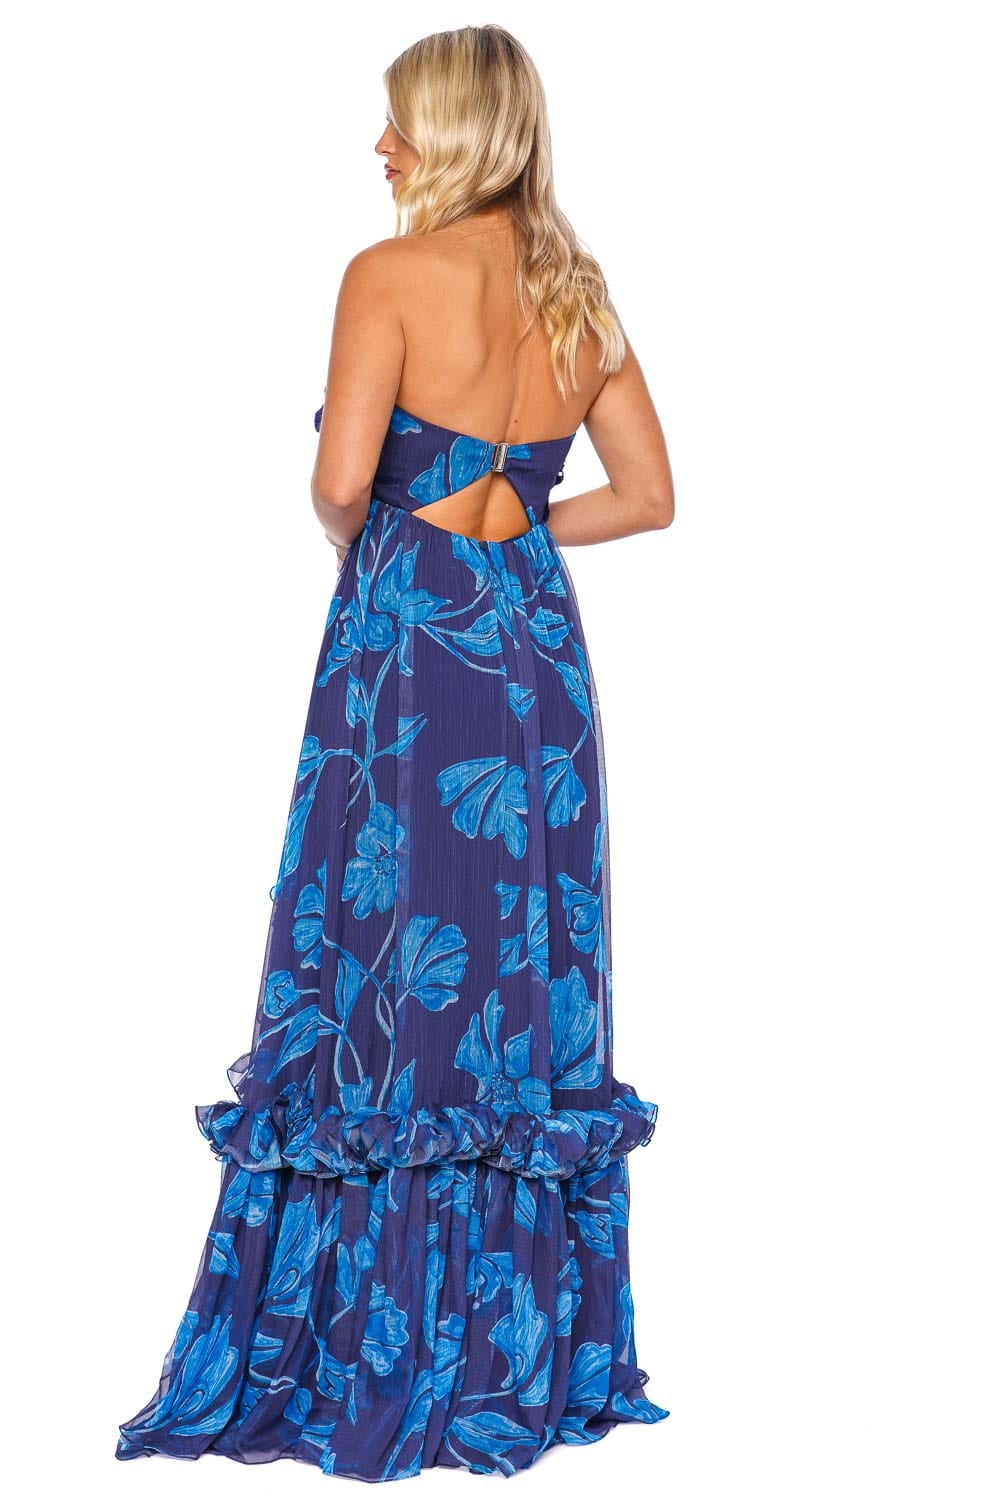 PatBO Nightflower Beaded Strapless Gown